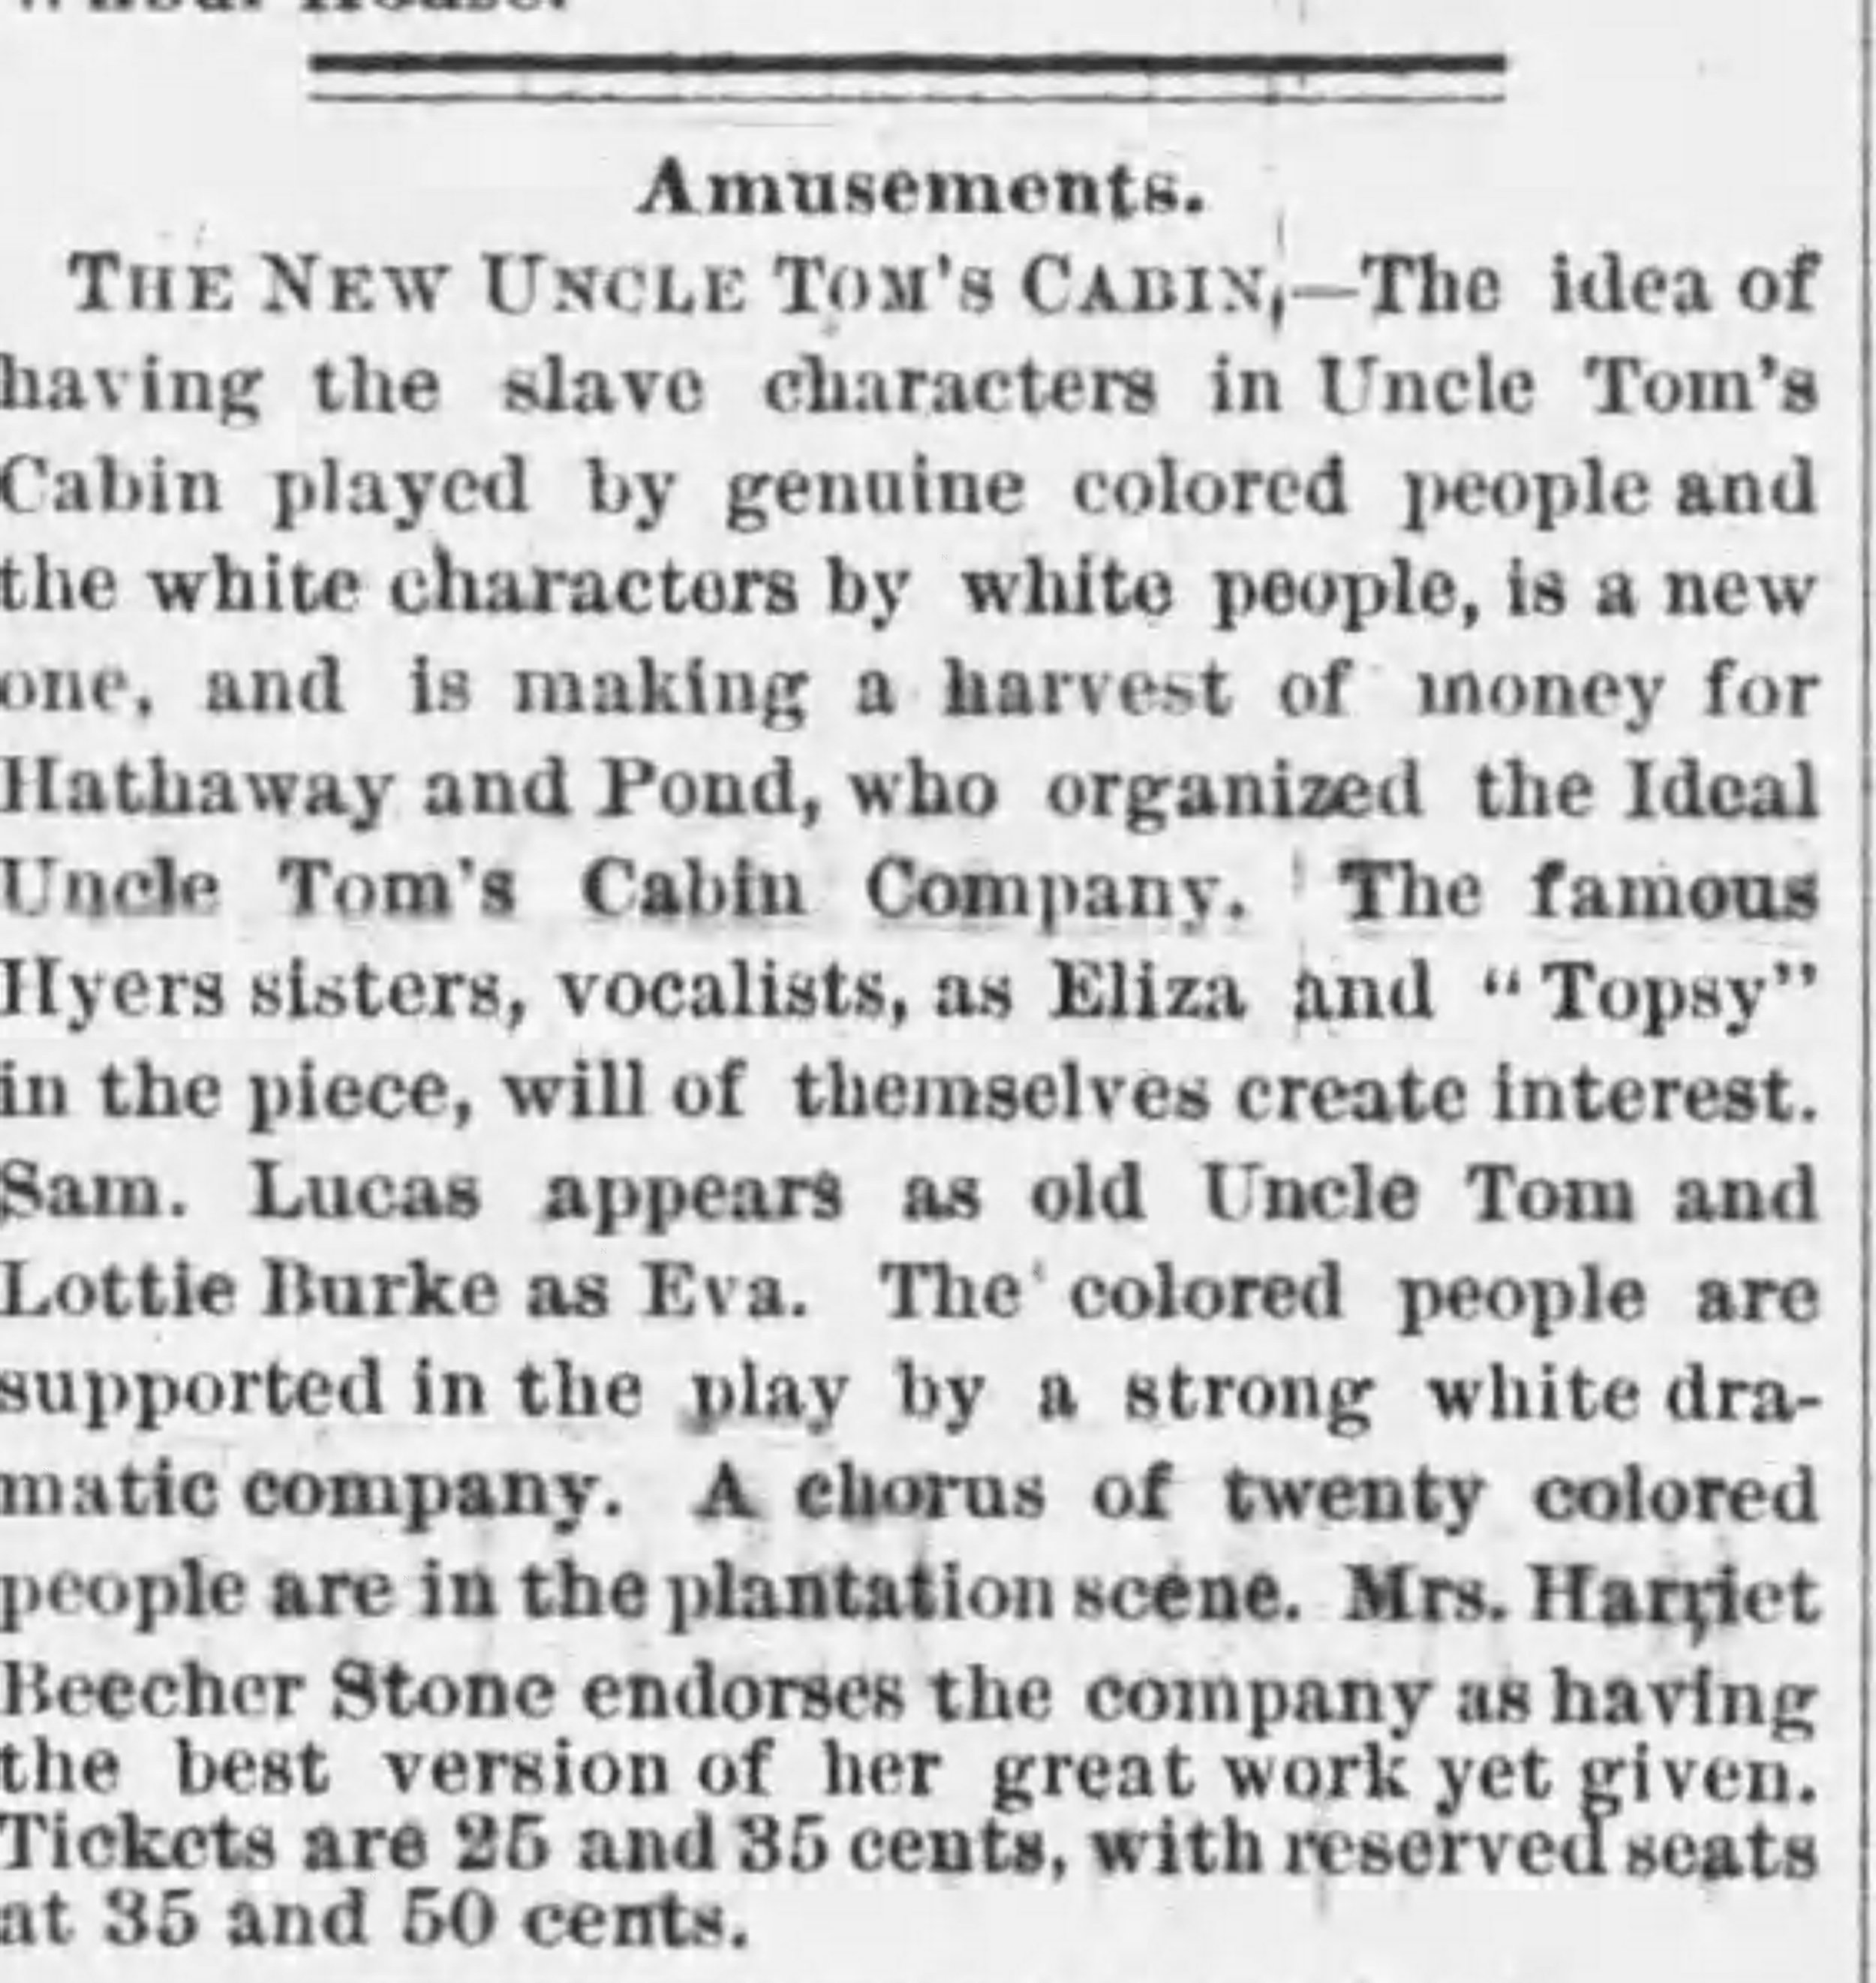 15_1880-04-17 Fall River Daily Evening News_Hyers_Lucas_Uncle Tom_s Cabin blurb.jpg